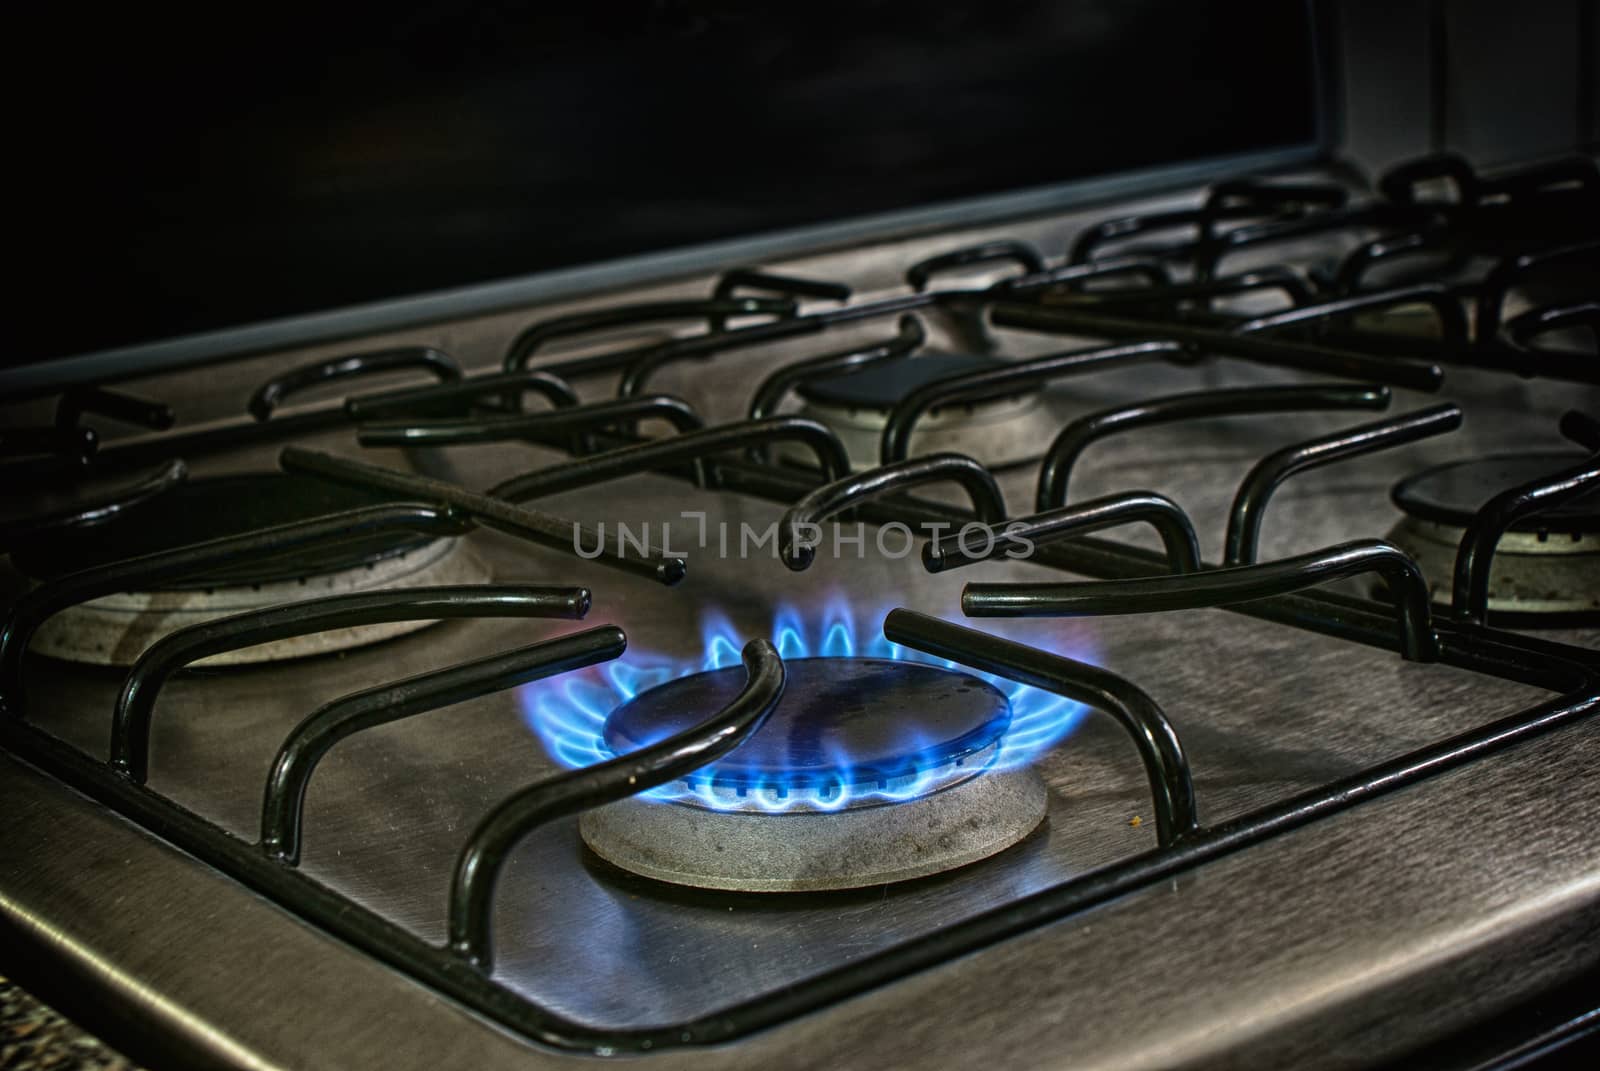 Photograph of a lighted metal gas stove and blue fire flame